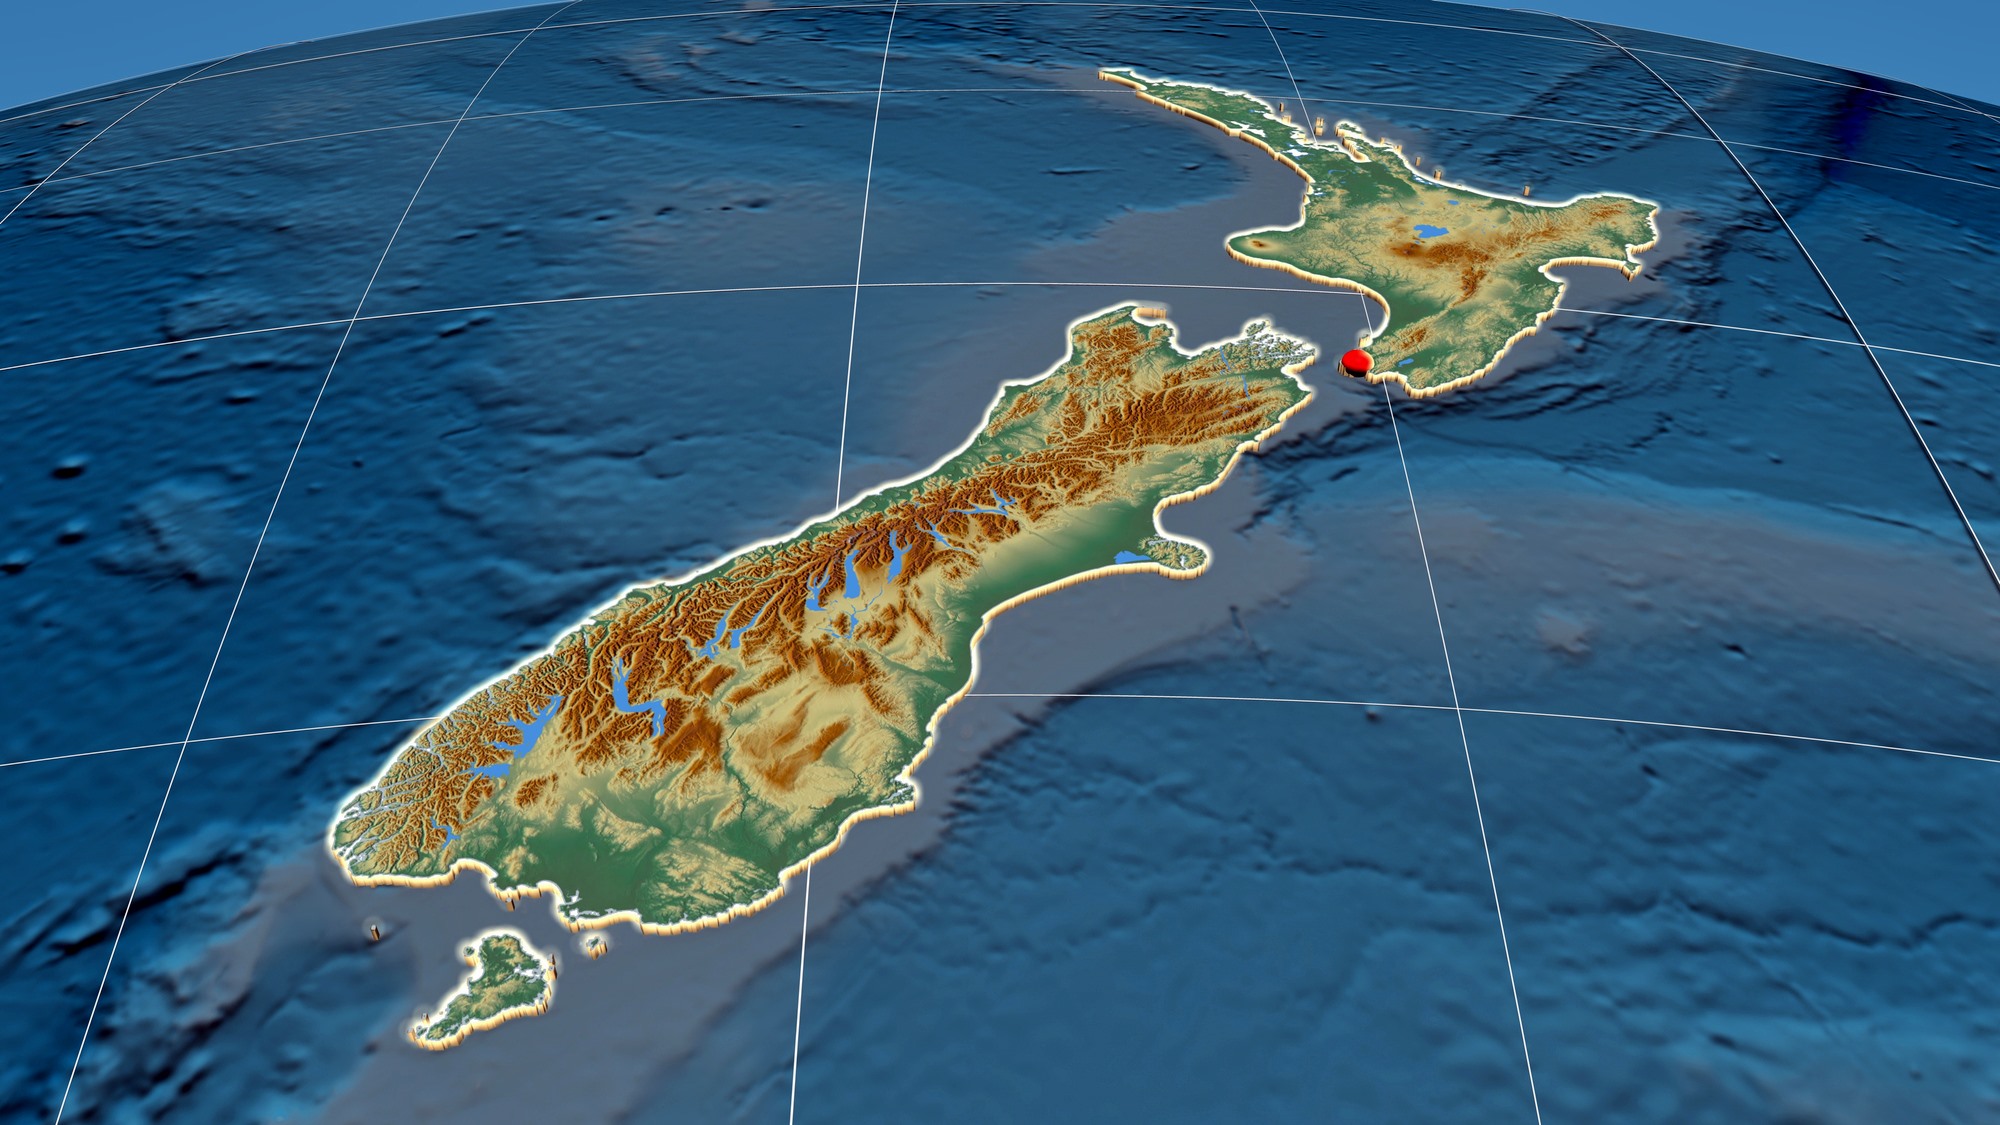 new zealand physical map